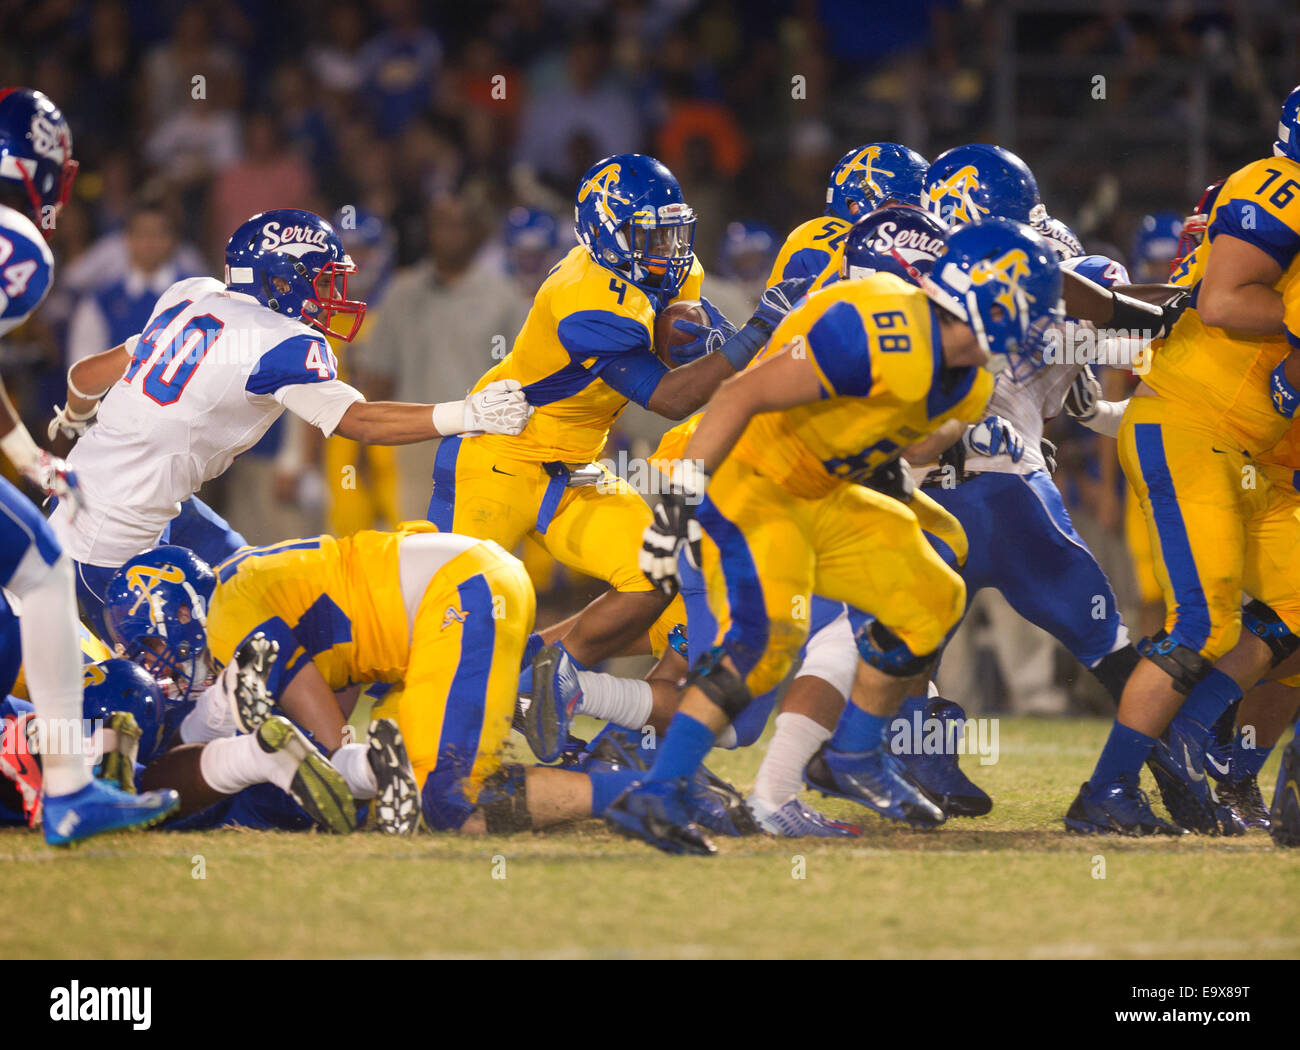 October 4, 2014, La Puente, CA.Bishop Amat lancers running back (4) Torreahno Sweet in action during the Bishop Amat upset of the Cavaliers at Bishop Amat high school on October 3, 2014. The Cavaliers who are usually a nationally ranked high school football team, were upset by Bishop Amat 14 - 7. (Mandatory Credit: Ed Ruvalcaba/MarinMedia.org) (Complete photographer, and company credit required) Stock Photo